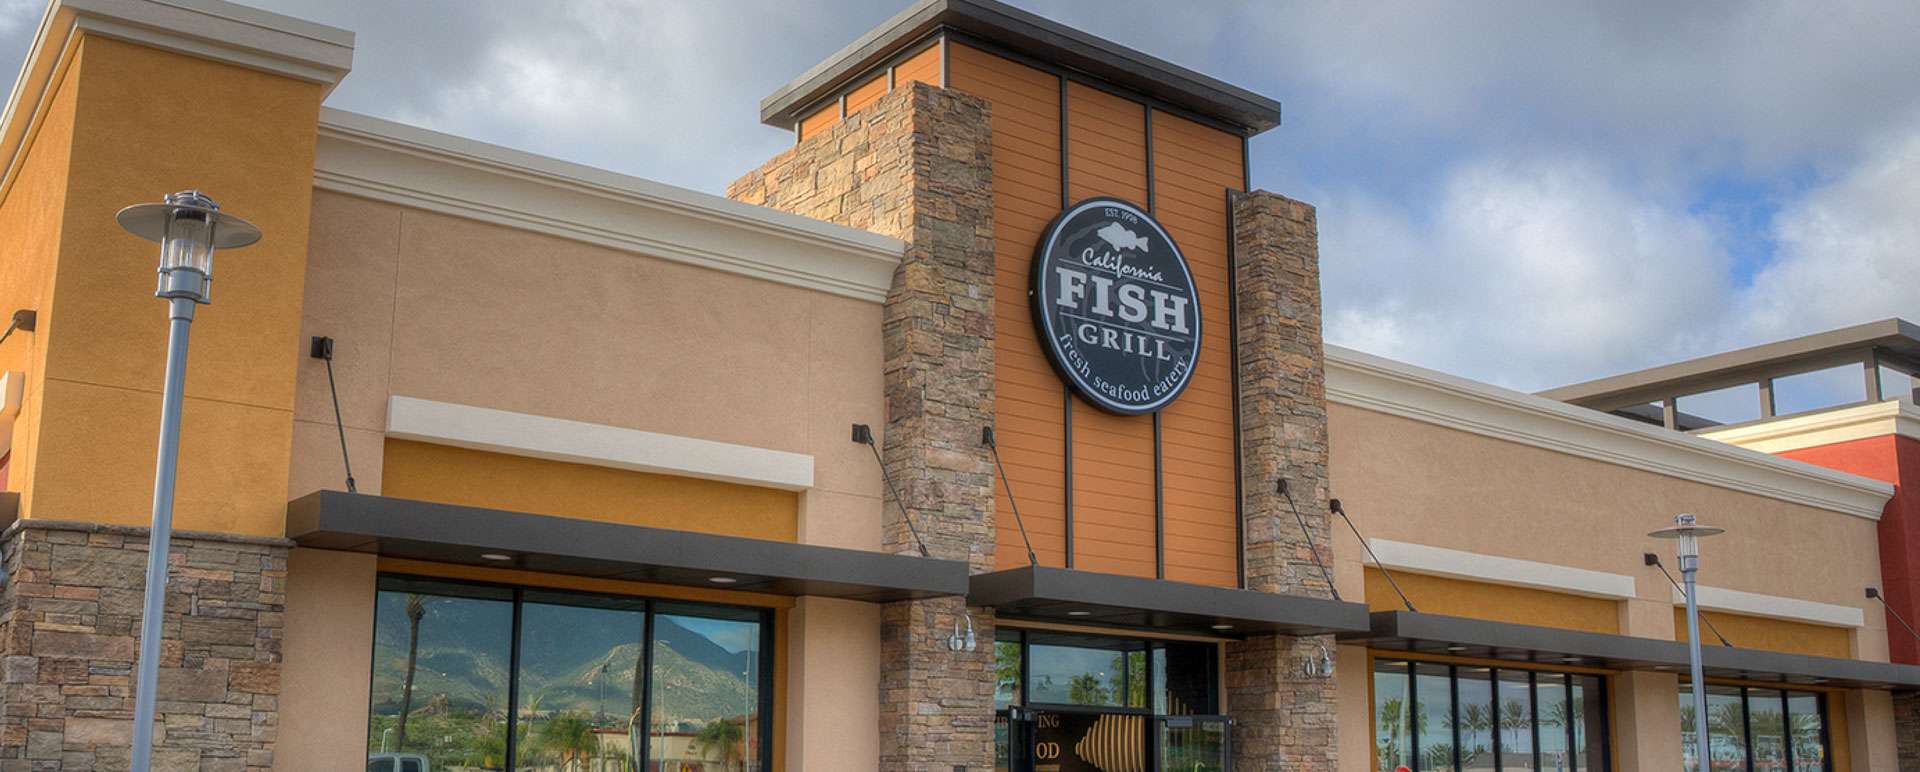 Velocity Retail Brings California Fish Grill to the Phoenix Area with 1st Store 3